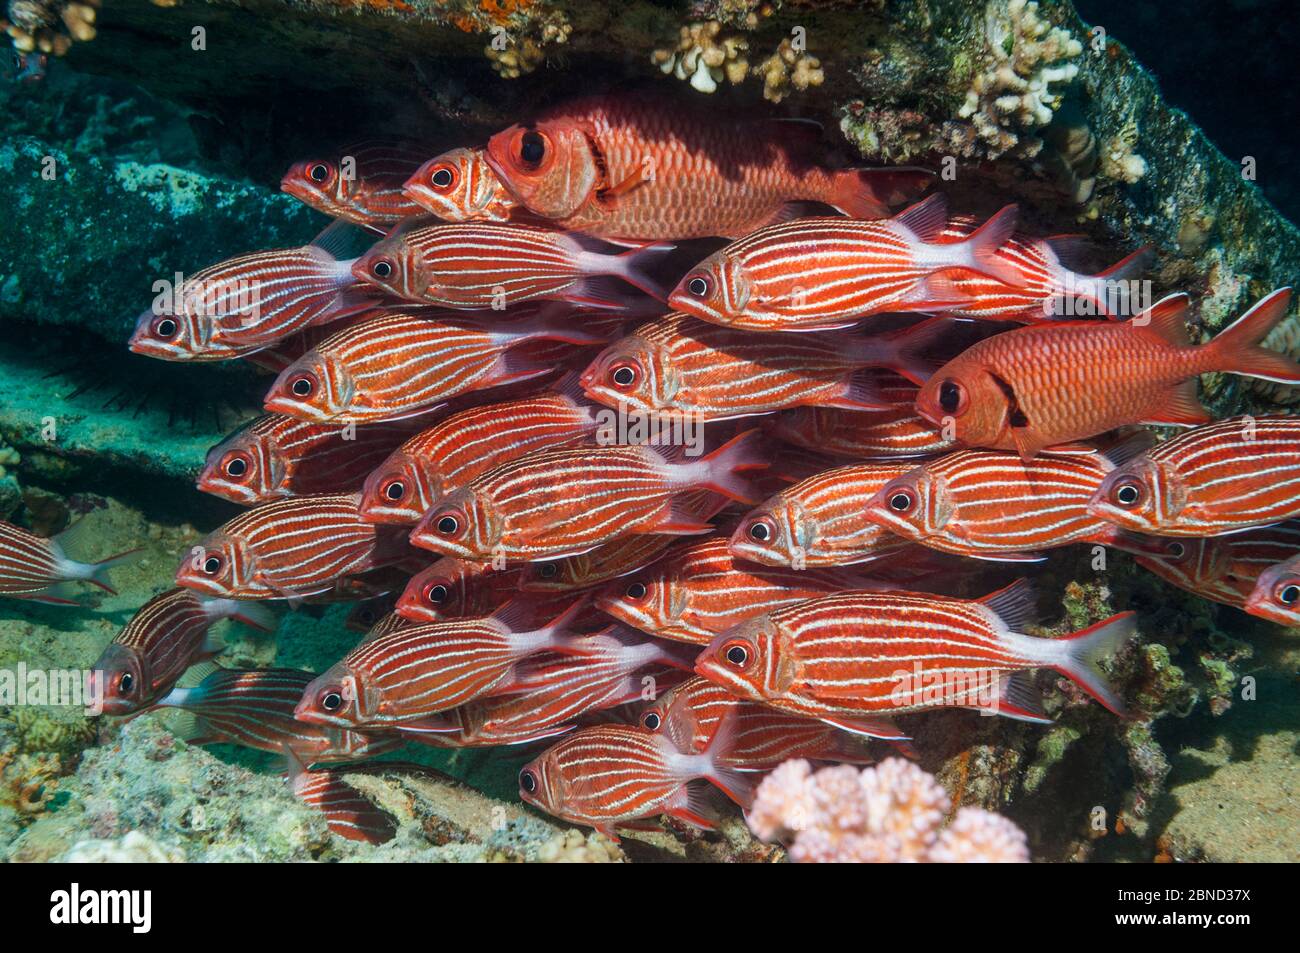 Crown squirrelfish (Sargocentron diadema) shoal, at rest on coral reef.  Egypt, Red Sea. Stock Photo